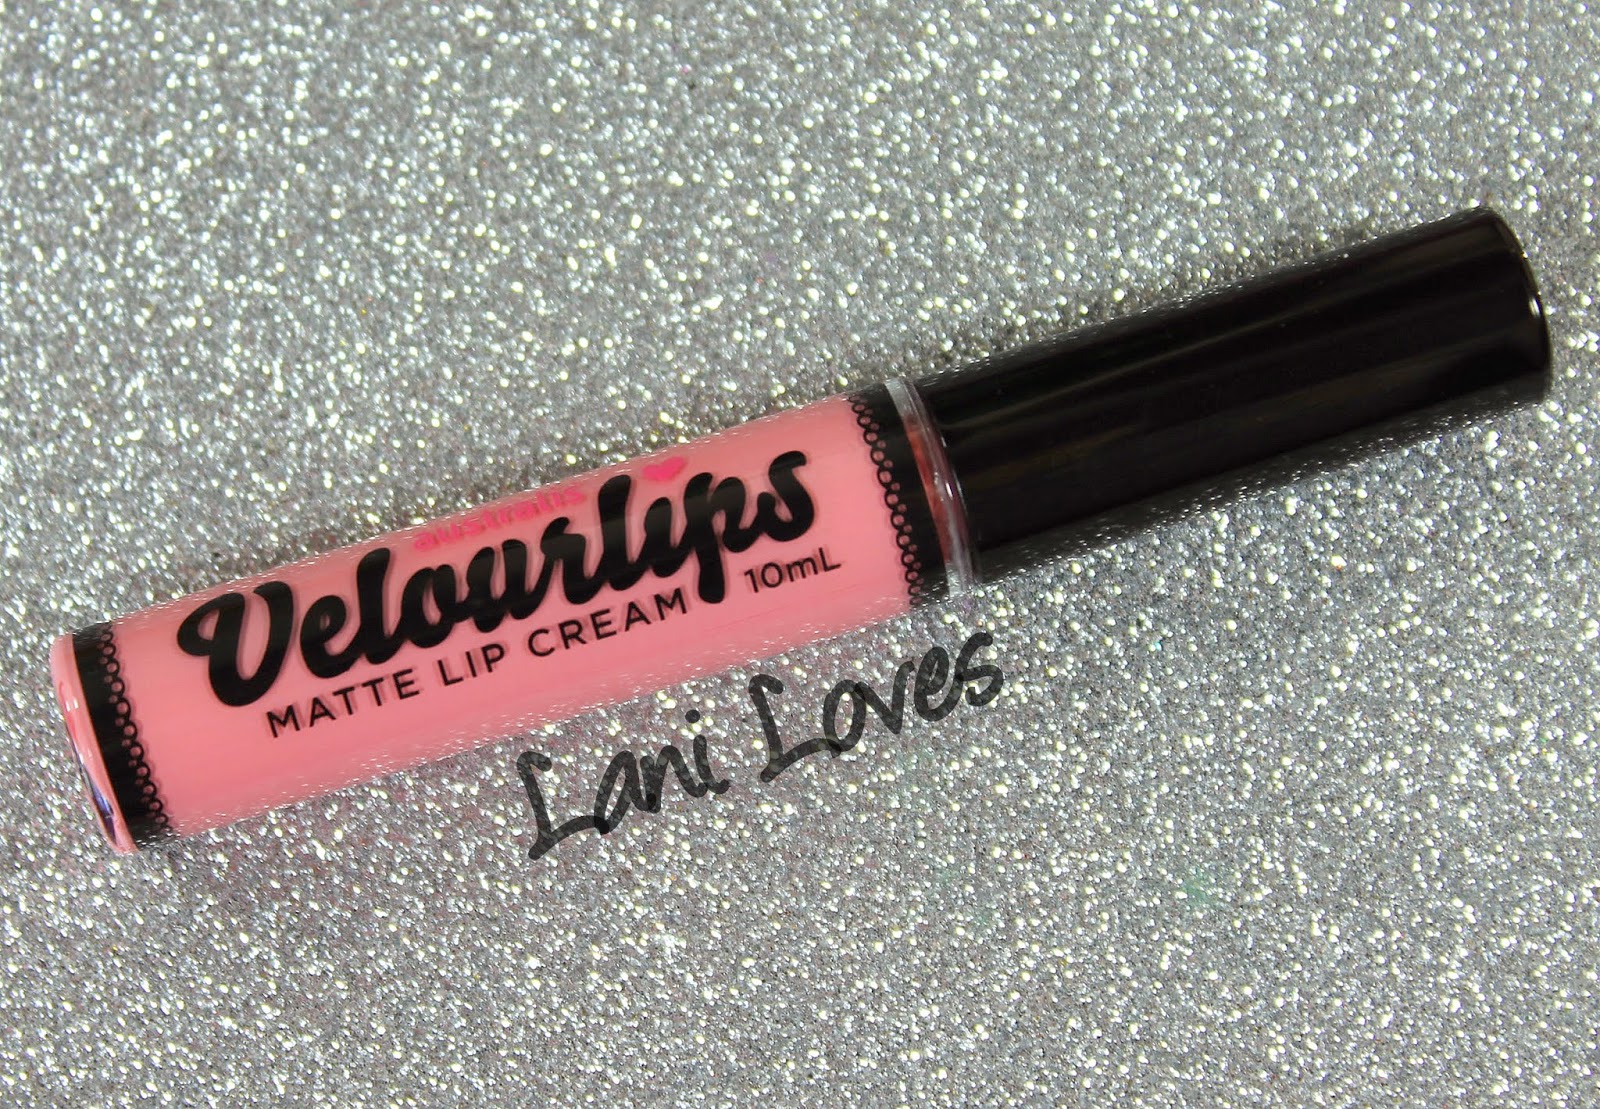 Australis Velourlips - HO-CHEE-MIN Swatches & Review